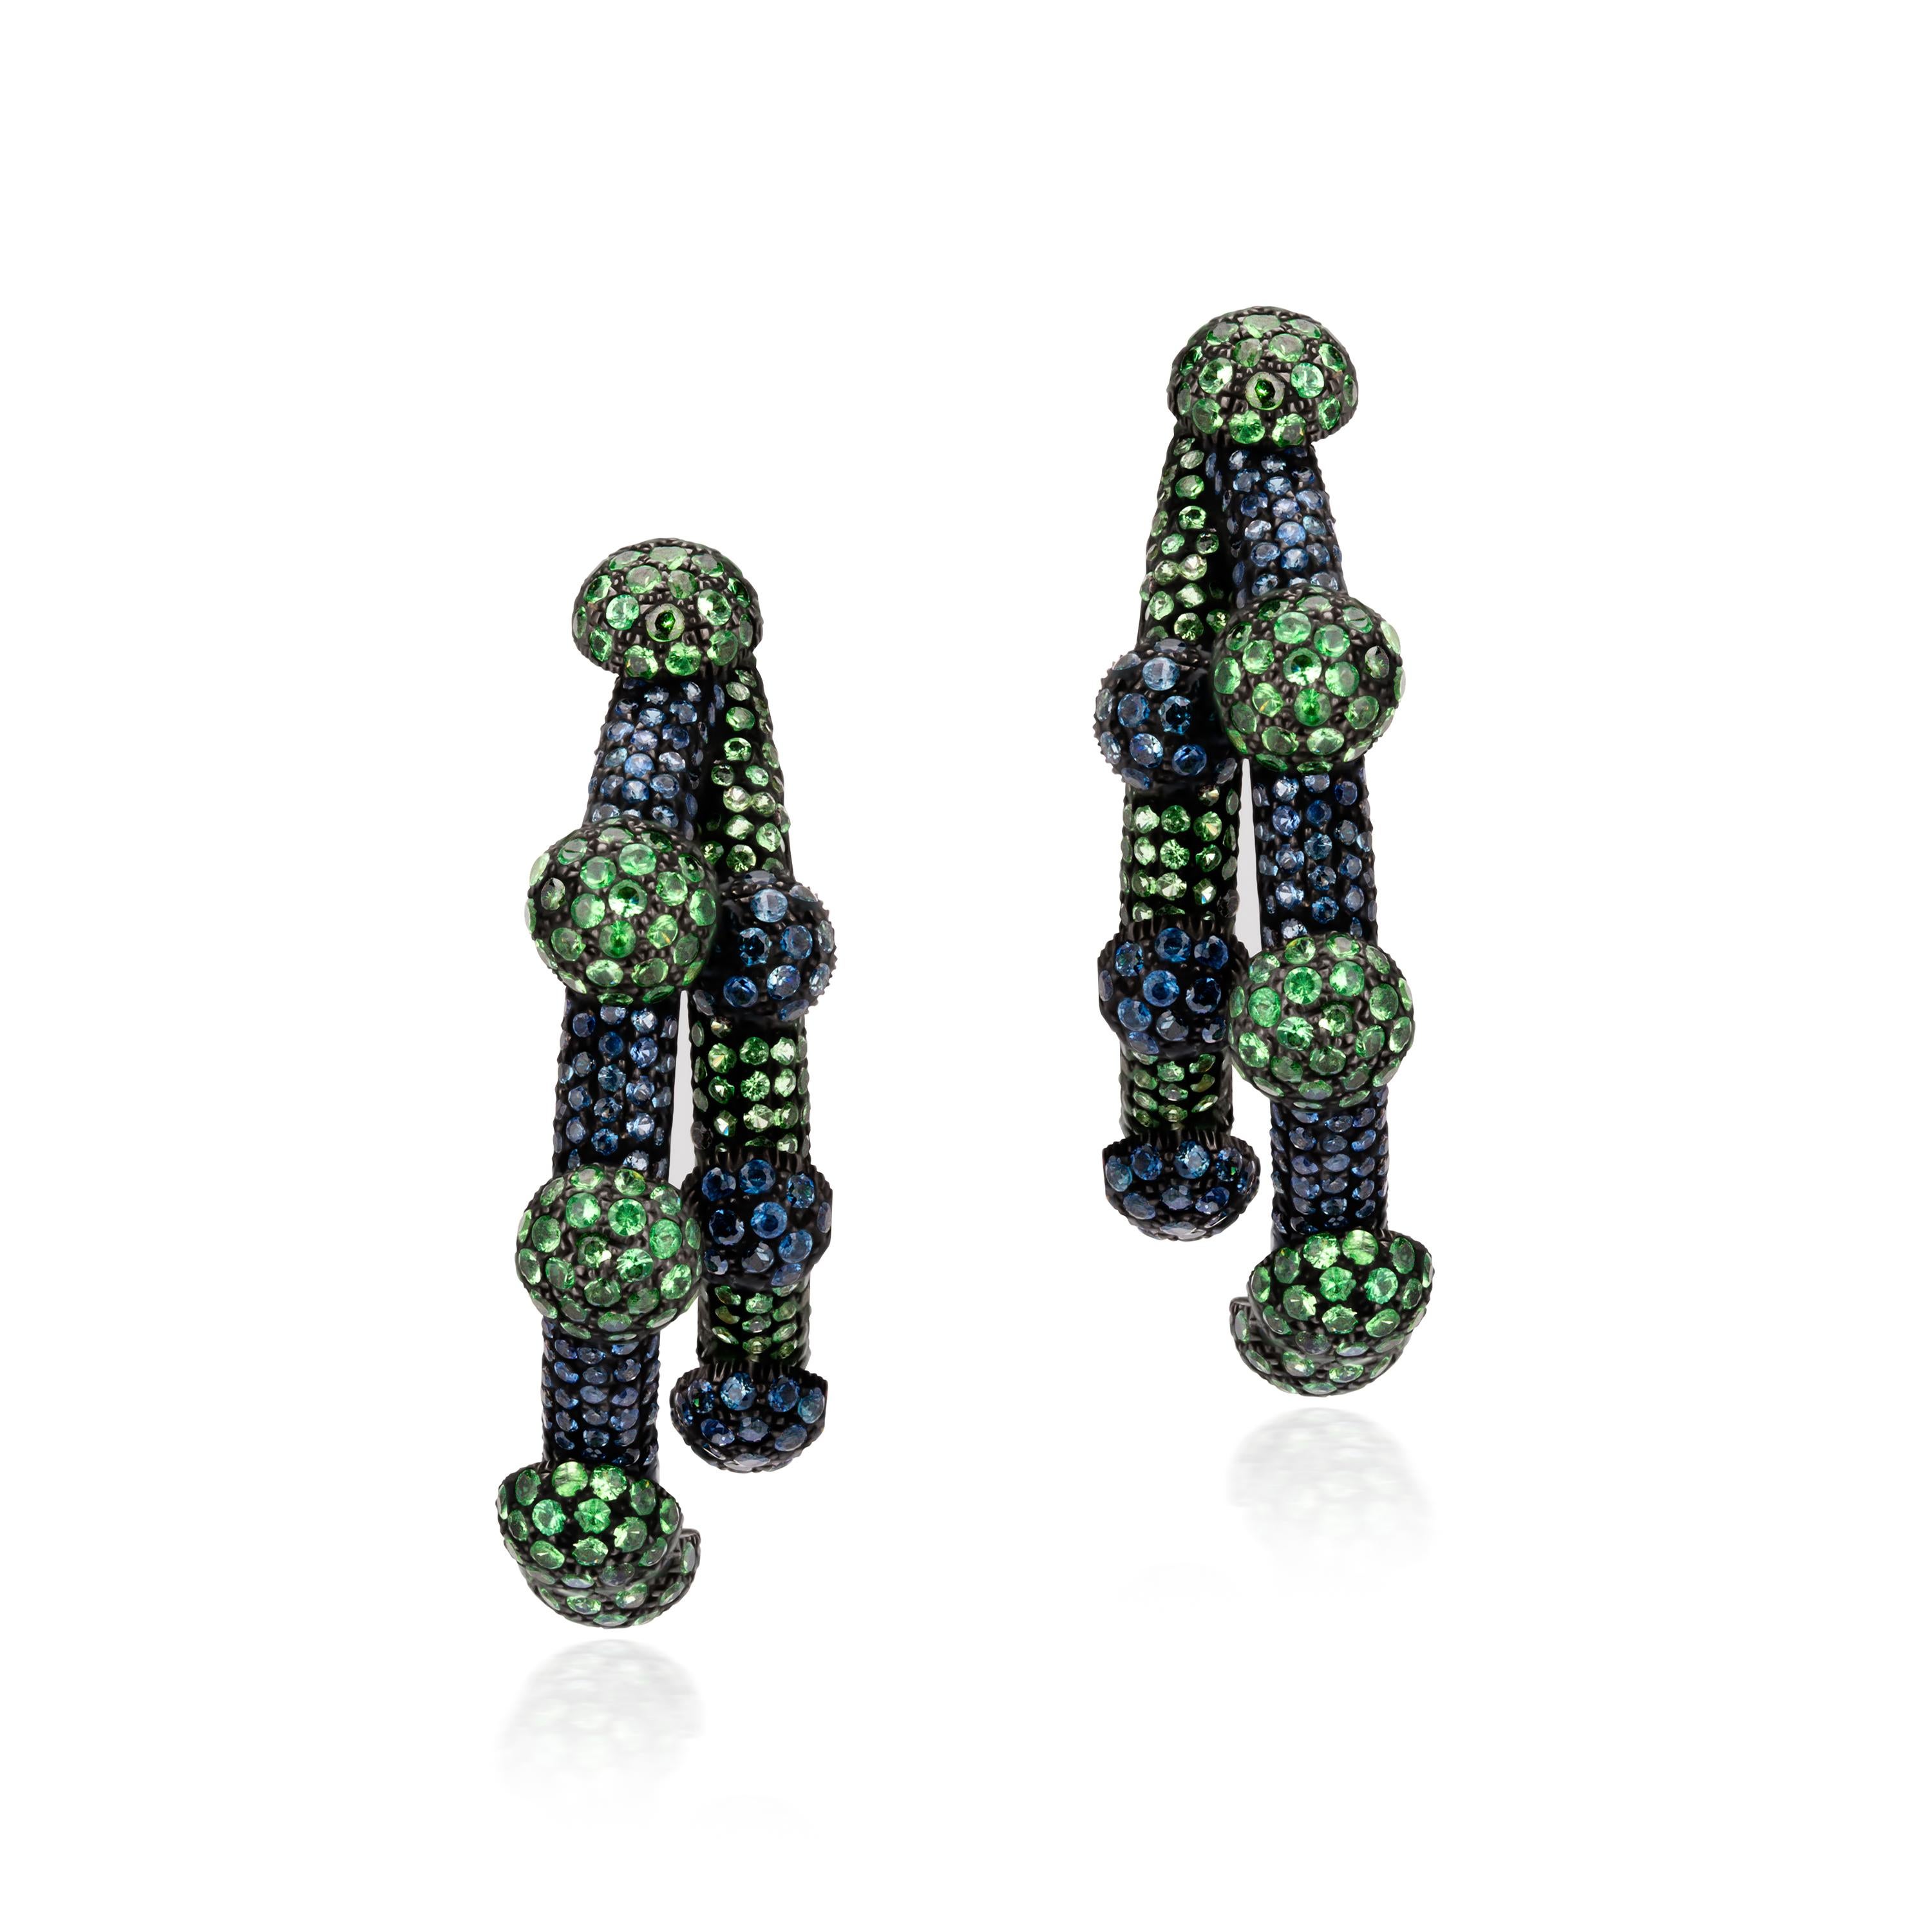 Illuminate your earlobes! Gracefully curved half hoops sparkle mightily with rows of blue sapphires, tsavorites and diamonds accentuated with circular droplets of more embellished gemstones. Rendered in 18K gold and 925 sterling silver, these